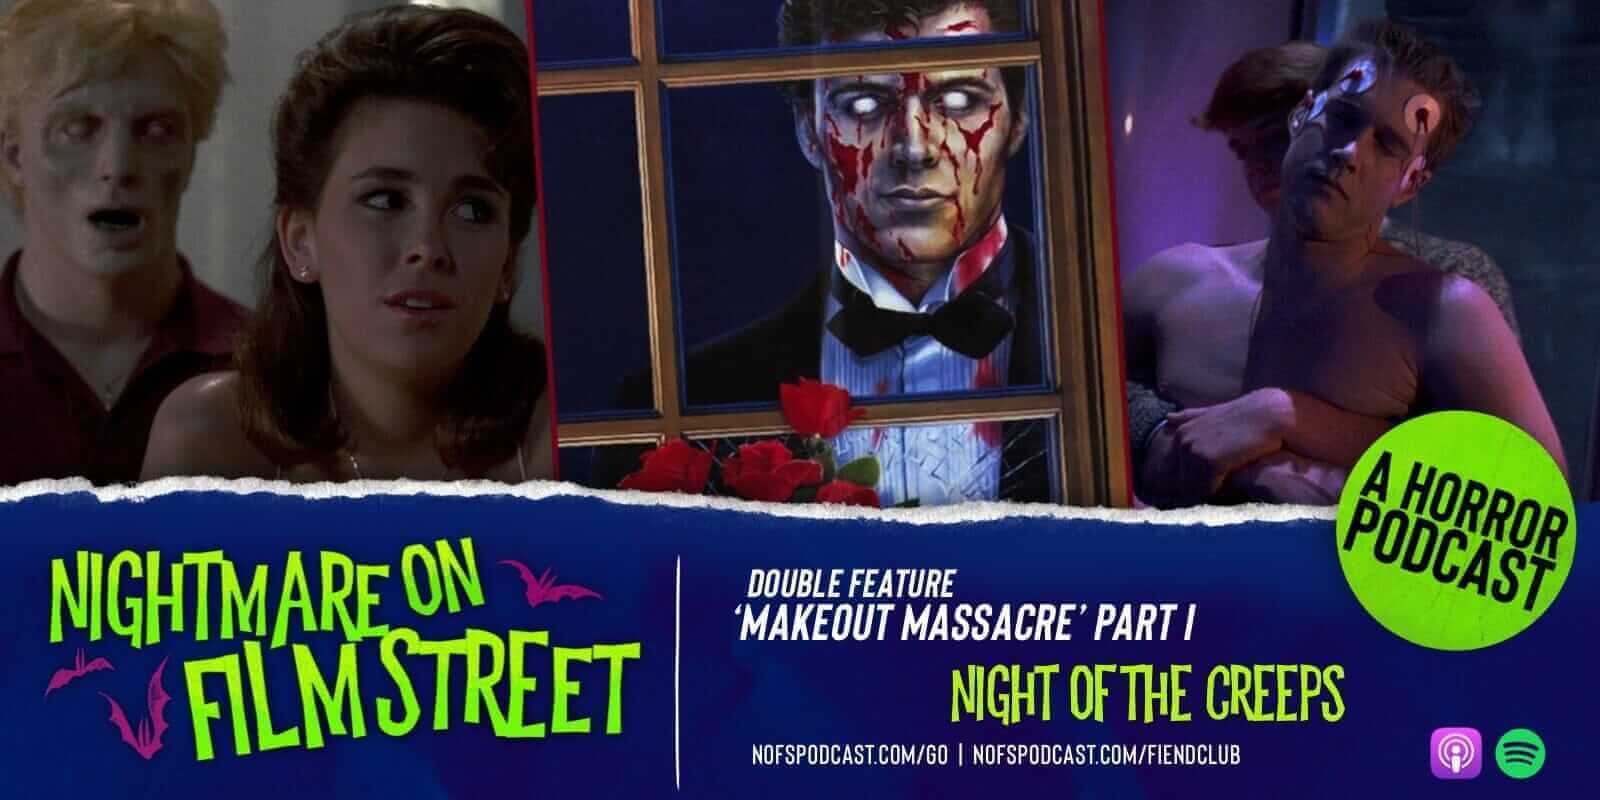 Nightmare on Film Street Podcast - night of the creeps - make out massacre part 1